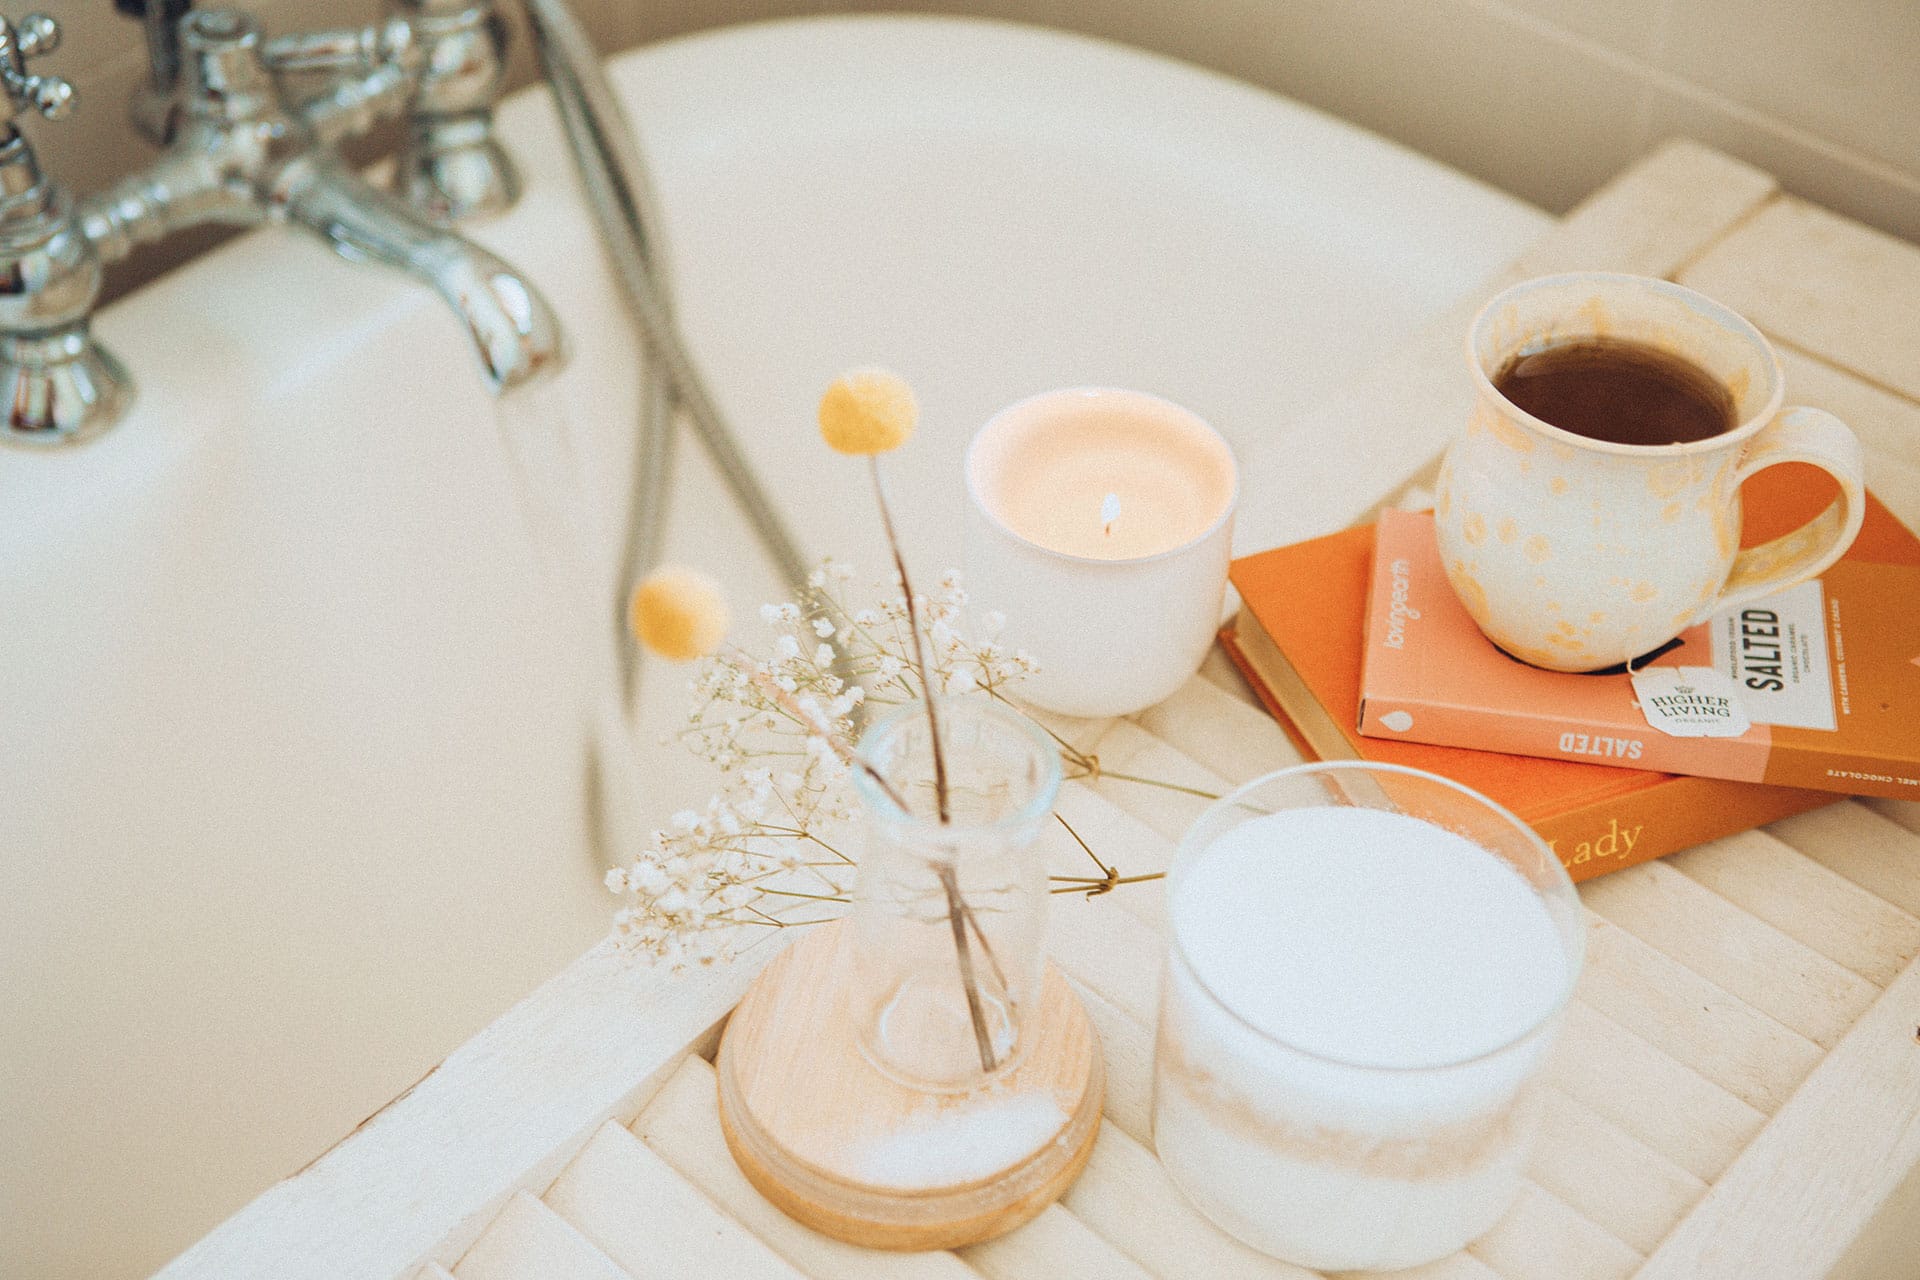 calming items on a tray over a bathtub for self care